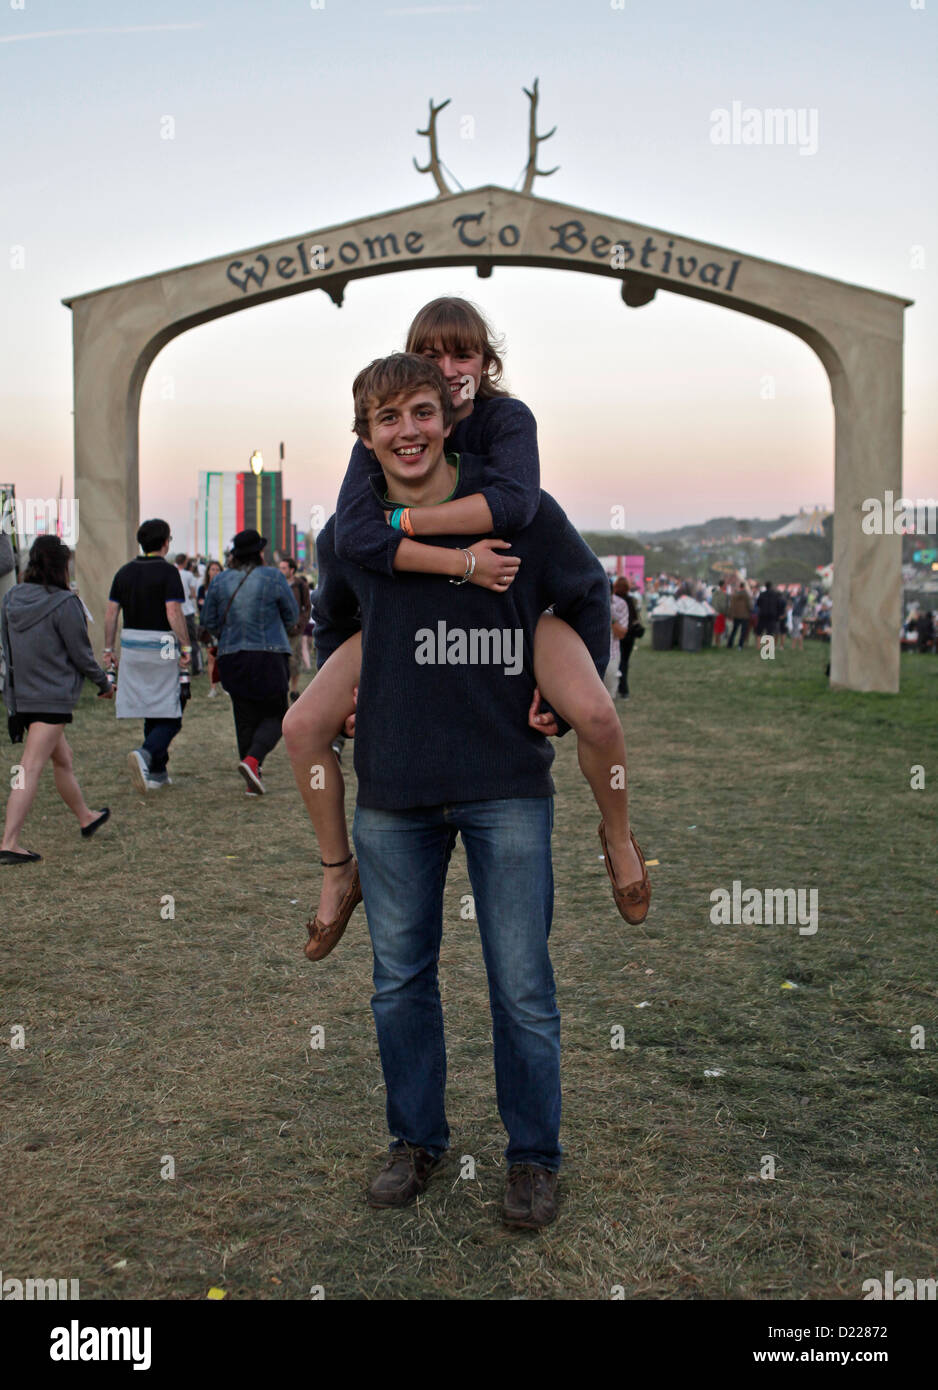 a girl gets a piggy back from friend at the welcome gate at BESTIVAL FESTIVAL, ISLE OF WHITE, SEPTEMBER 2012 Stock Photo